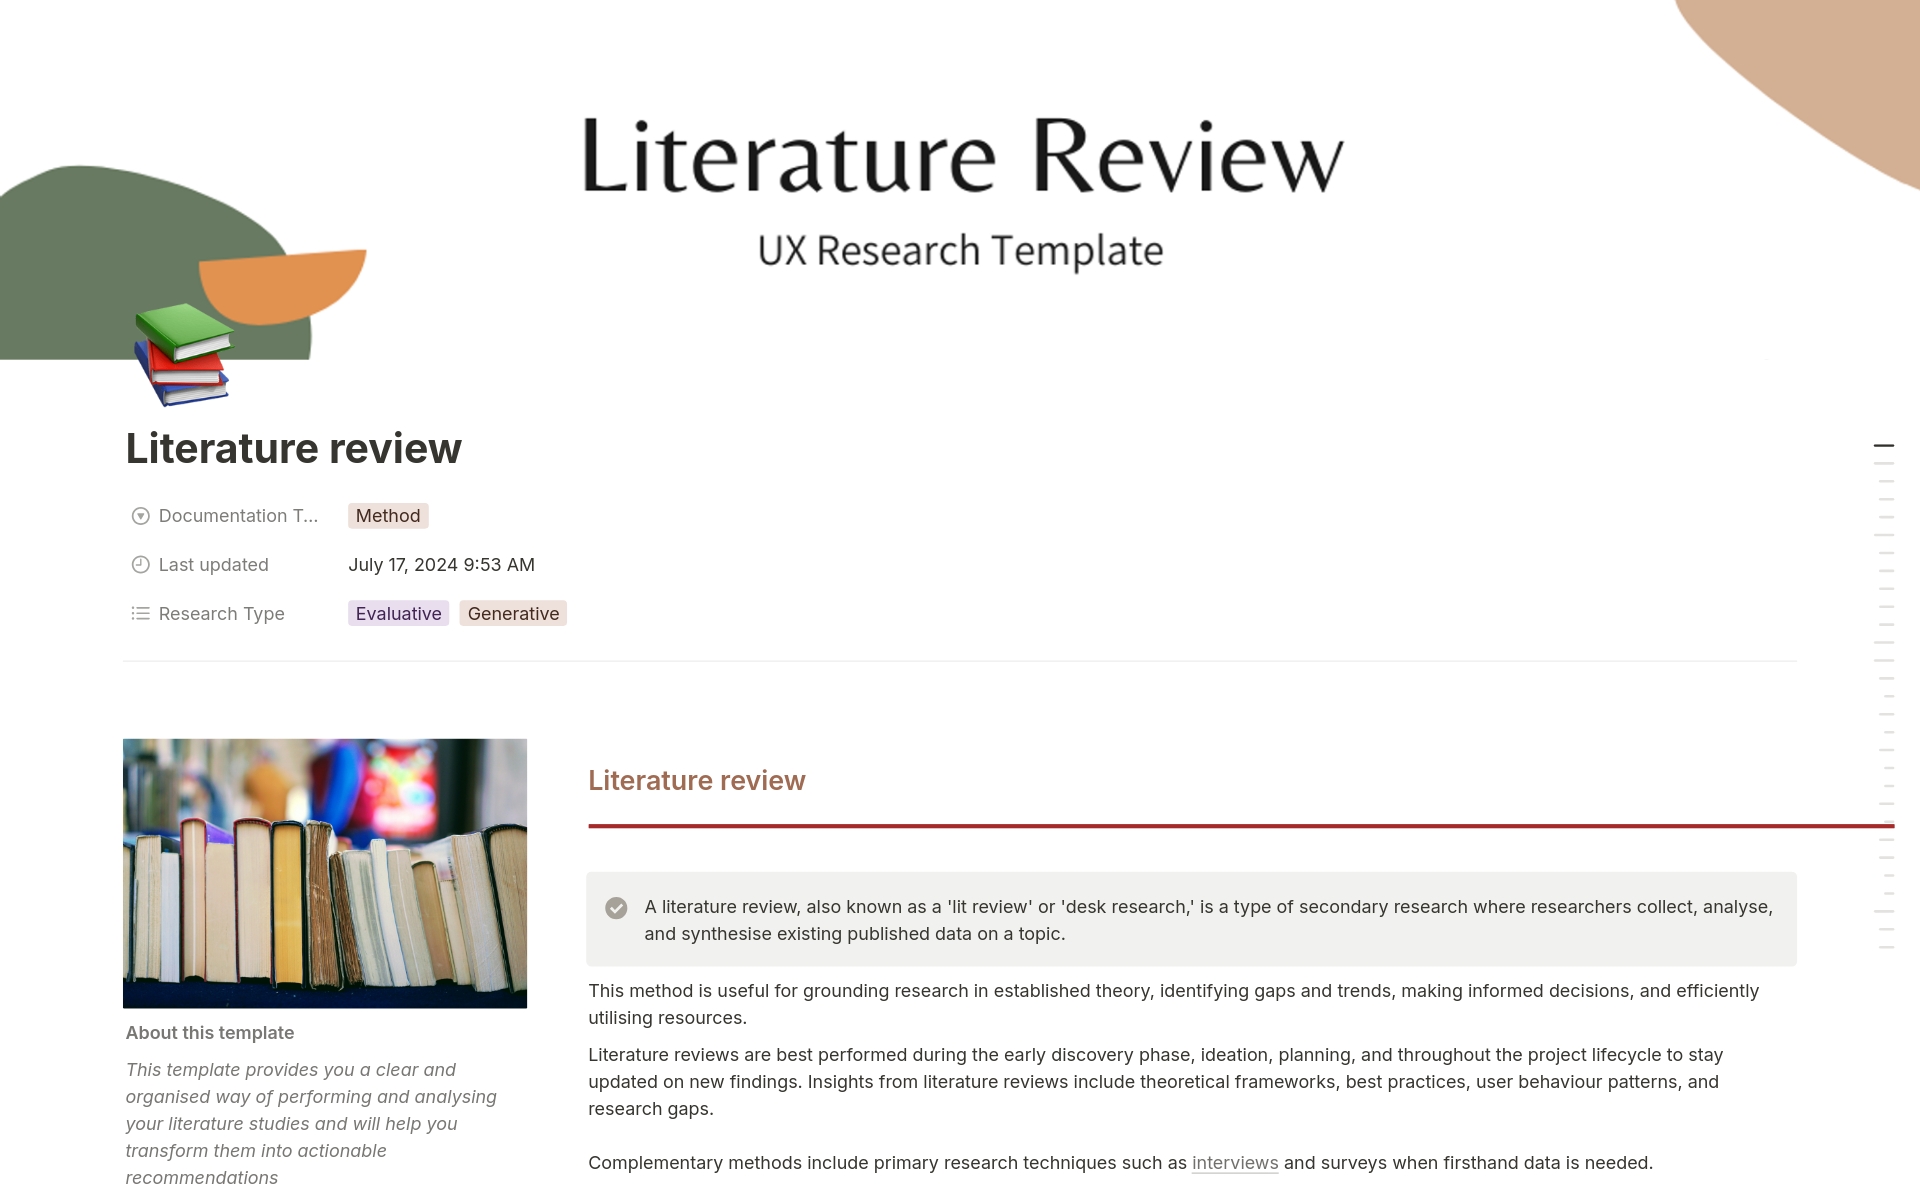 This template is meant to help UX Researchers, whether junior or senior, to create and organise literature reviews in an easy and accessible format.